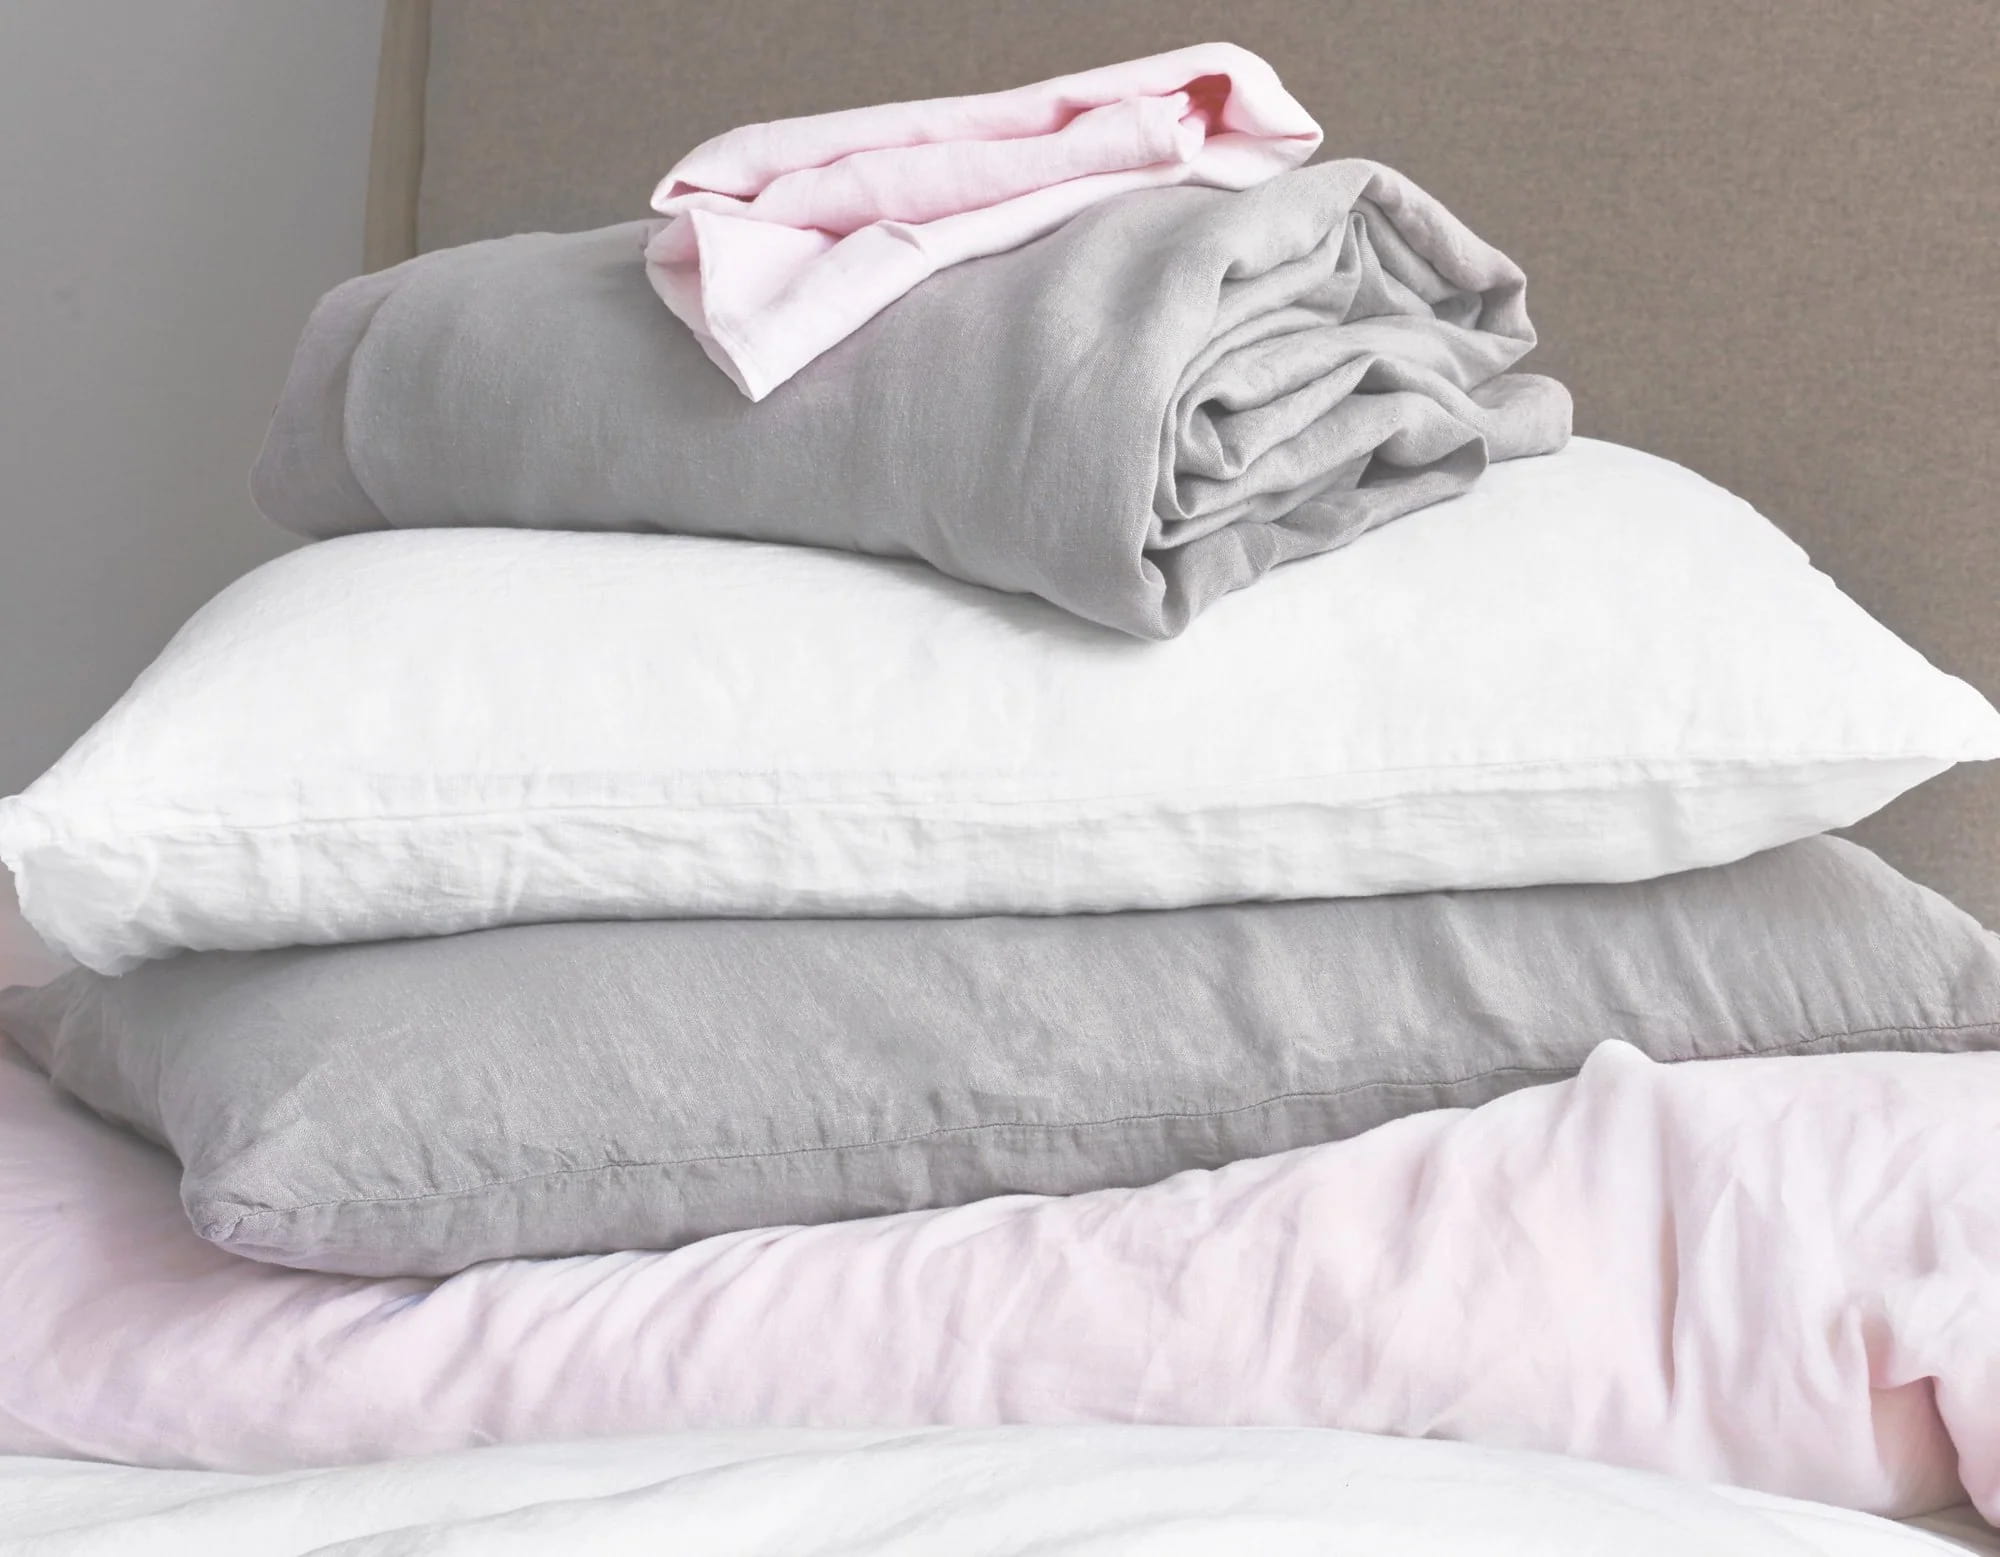 Pile of linen bedding in grey, pink and white